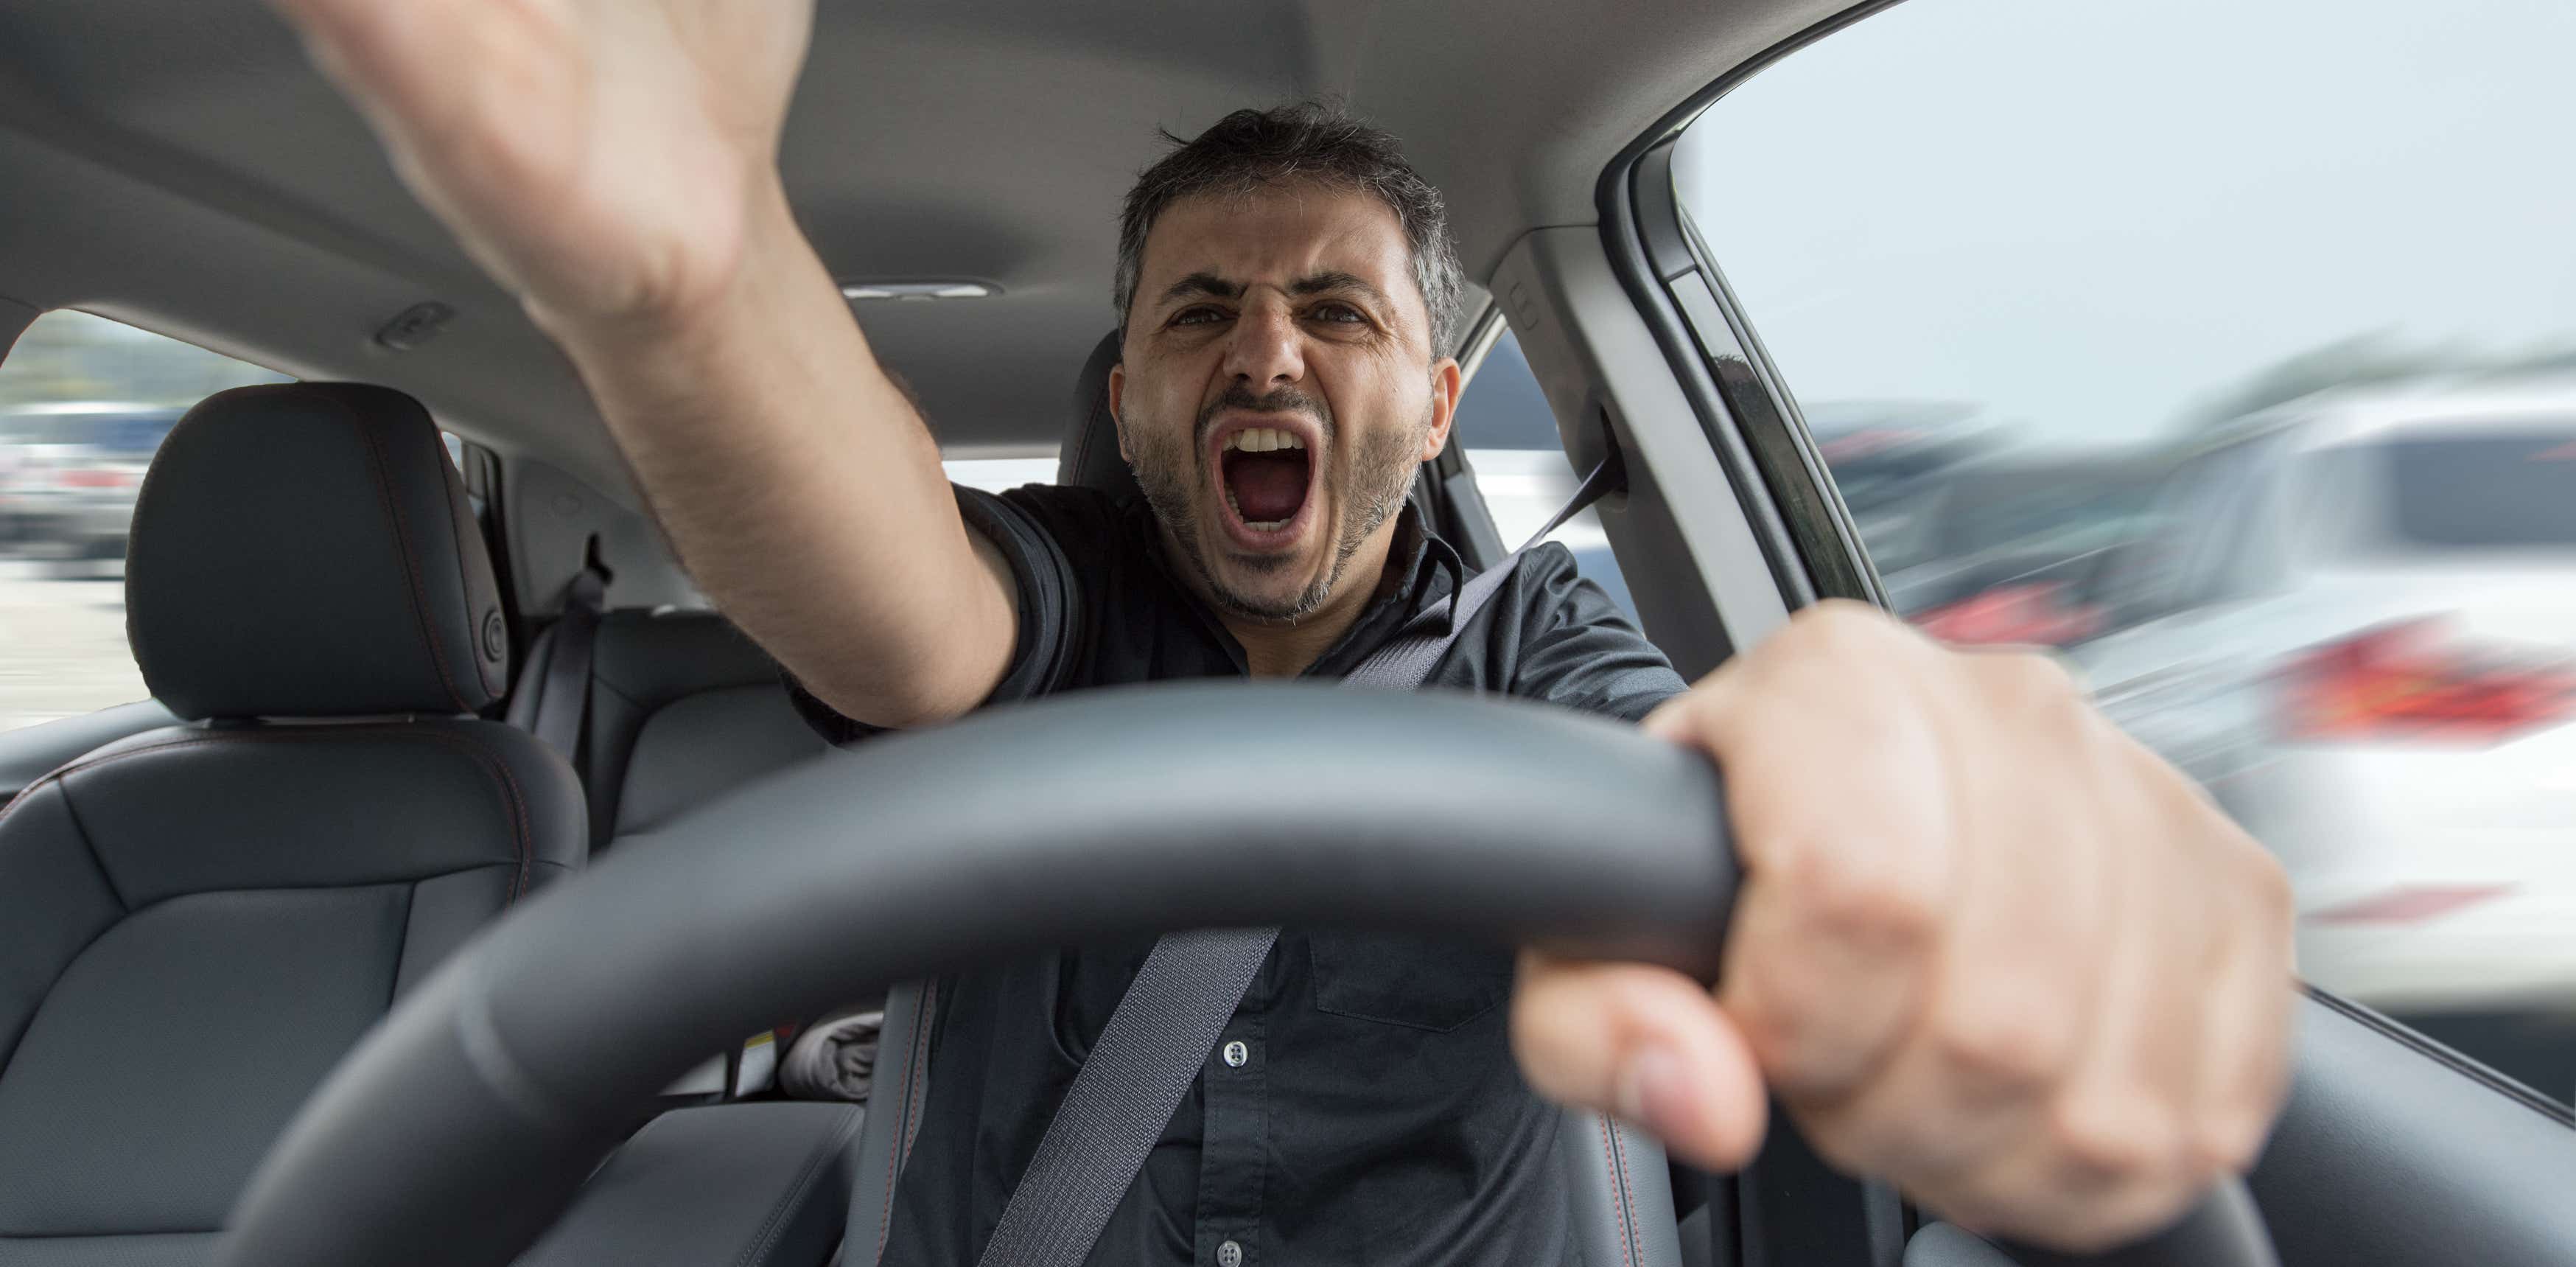 How angry do bad manners on the road really make us?